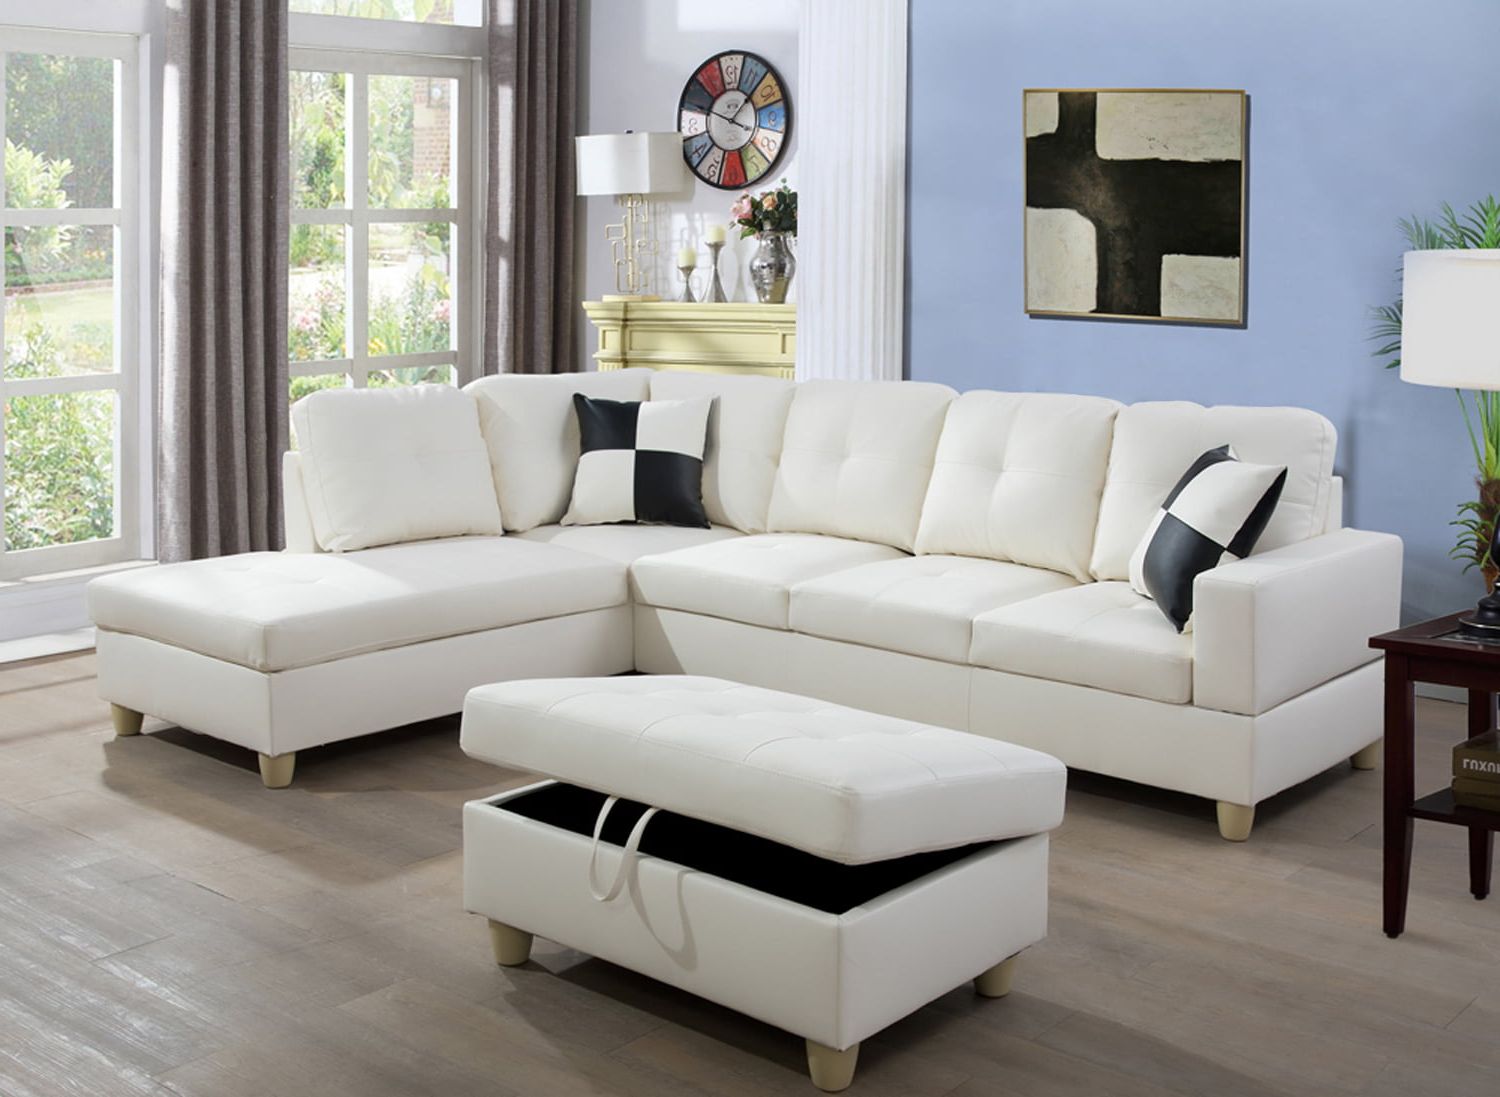 Ainehome Faux Leather Sectional Set, Living Room L Shaped Modern Sofa For Faux Leather Sectional Sofa Sets (View 5 of 20)